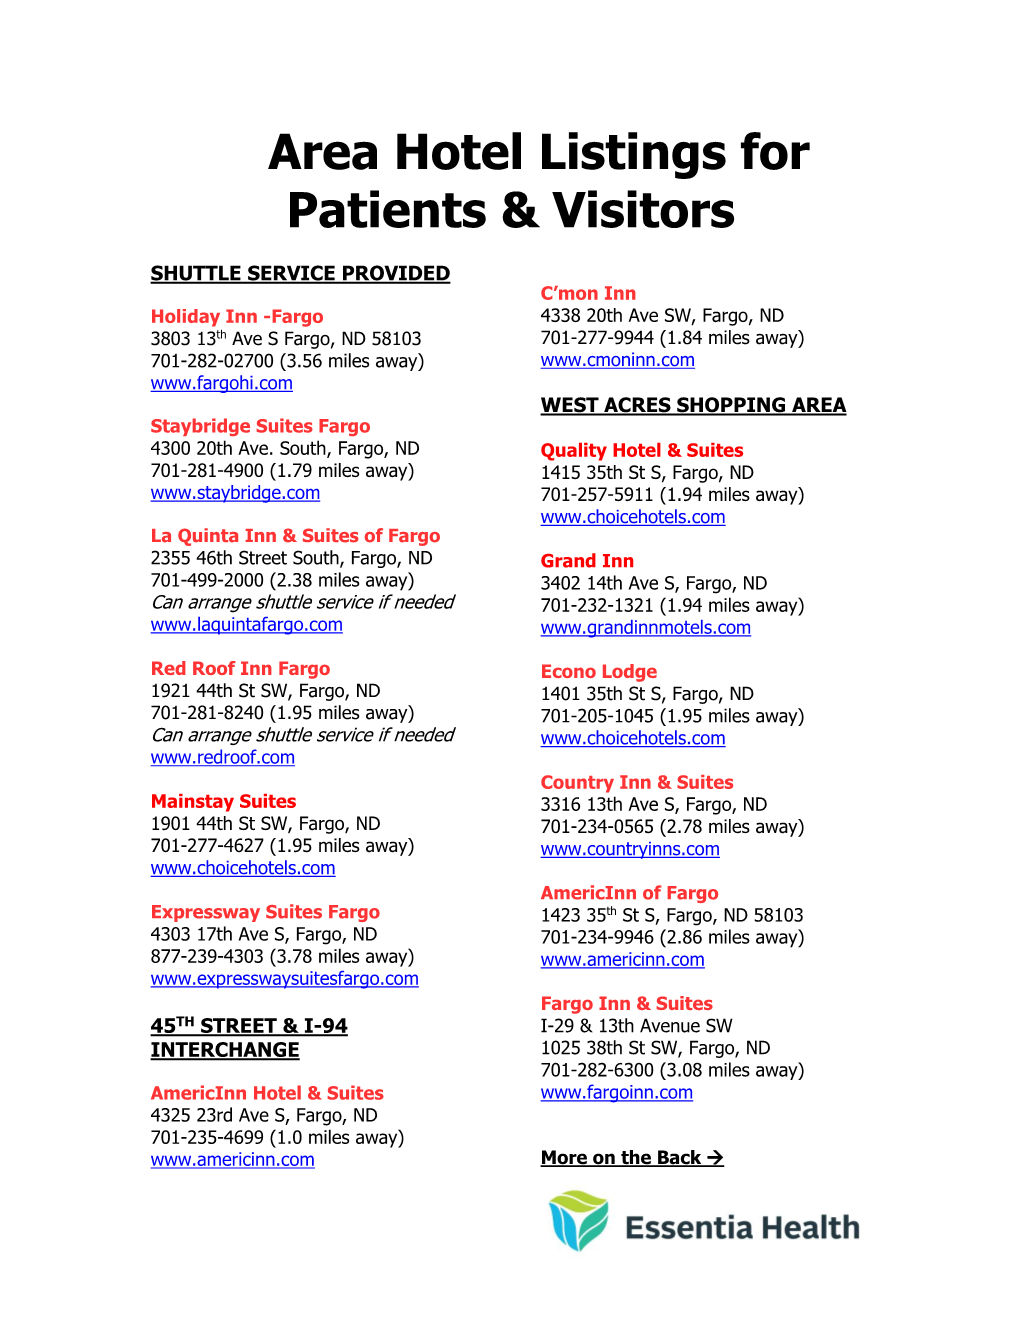 Area Hotel Listings for Patients & Visitors